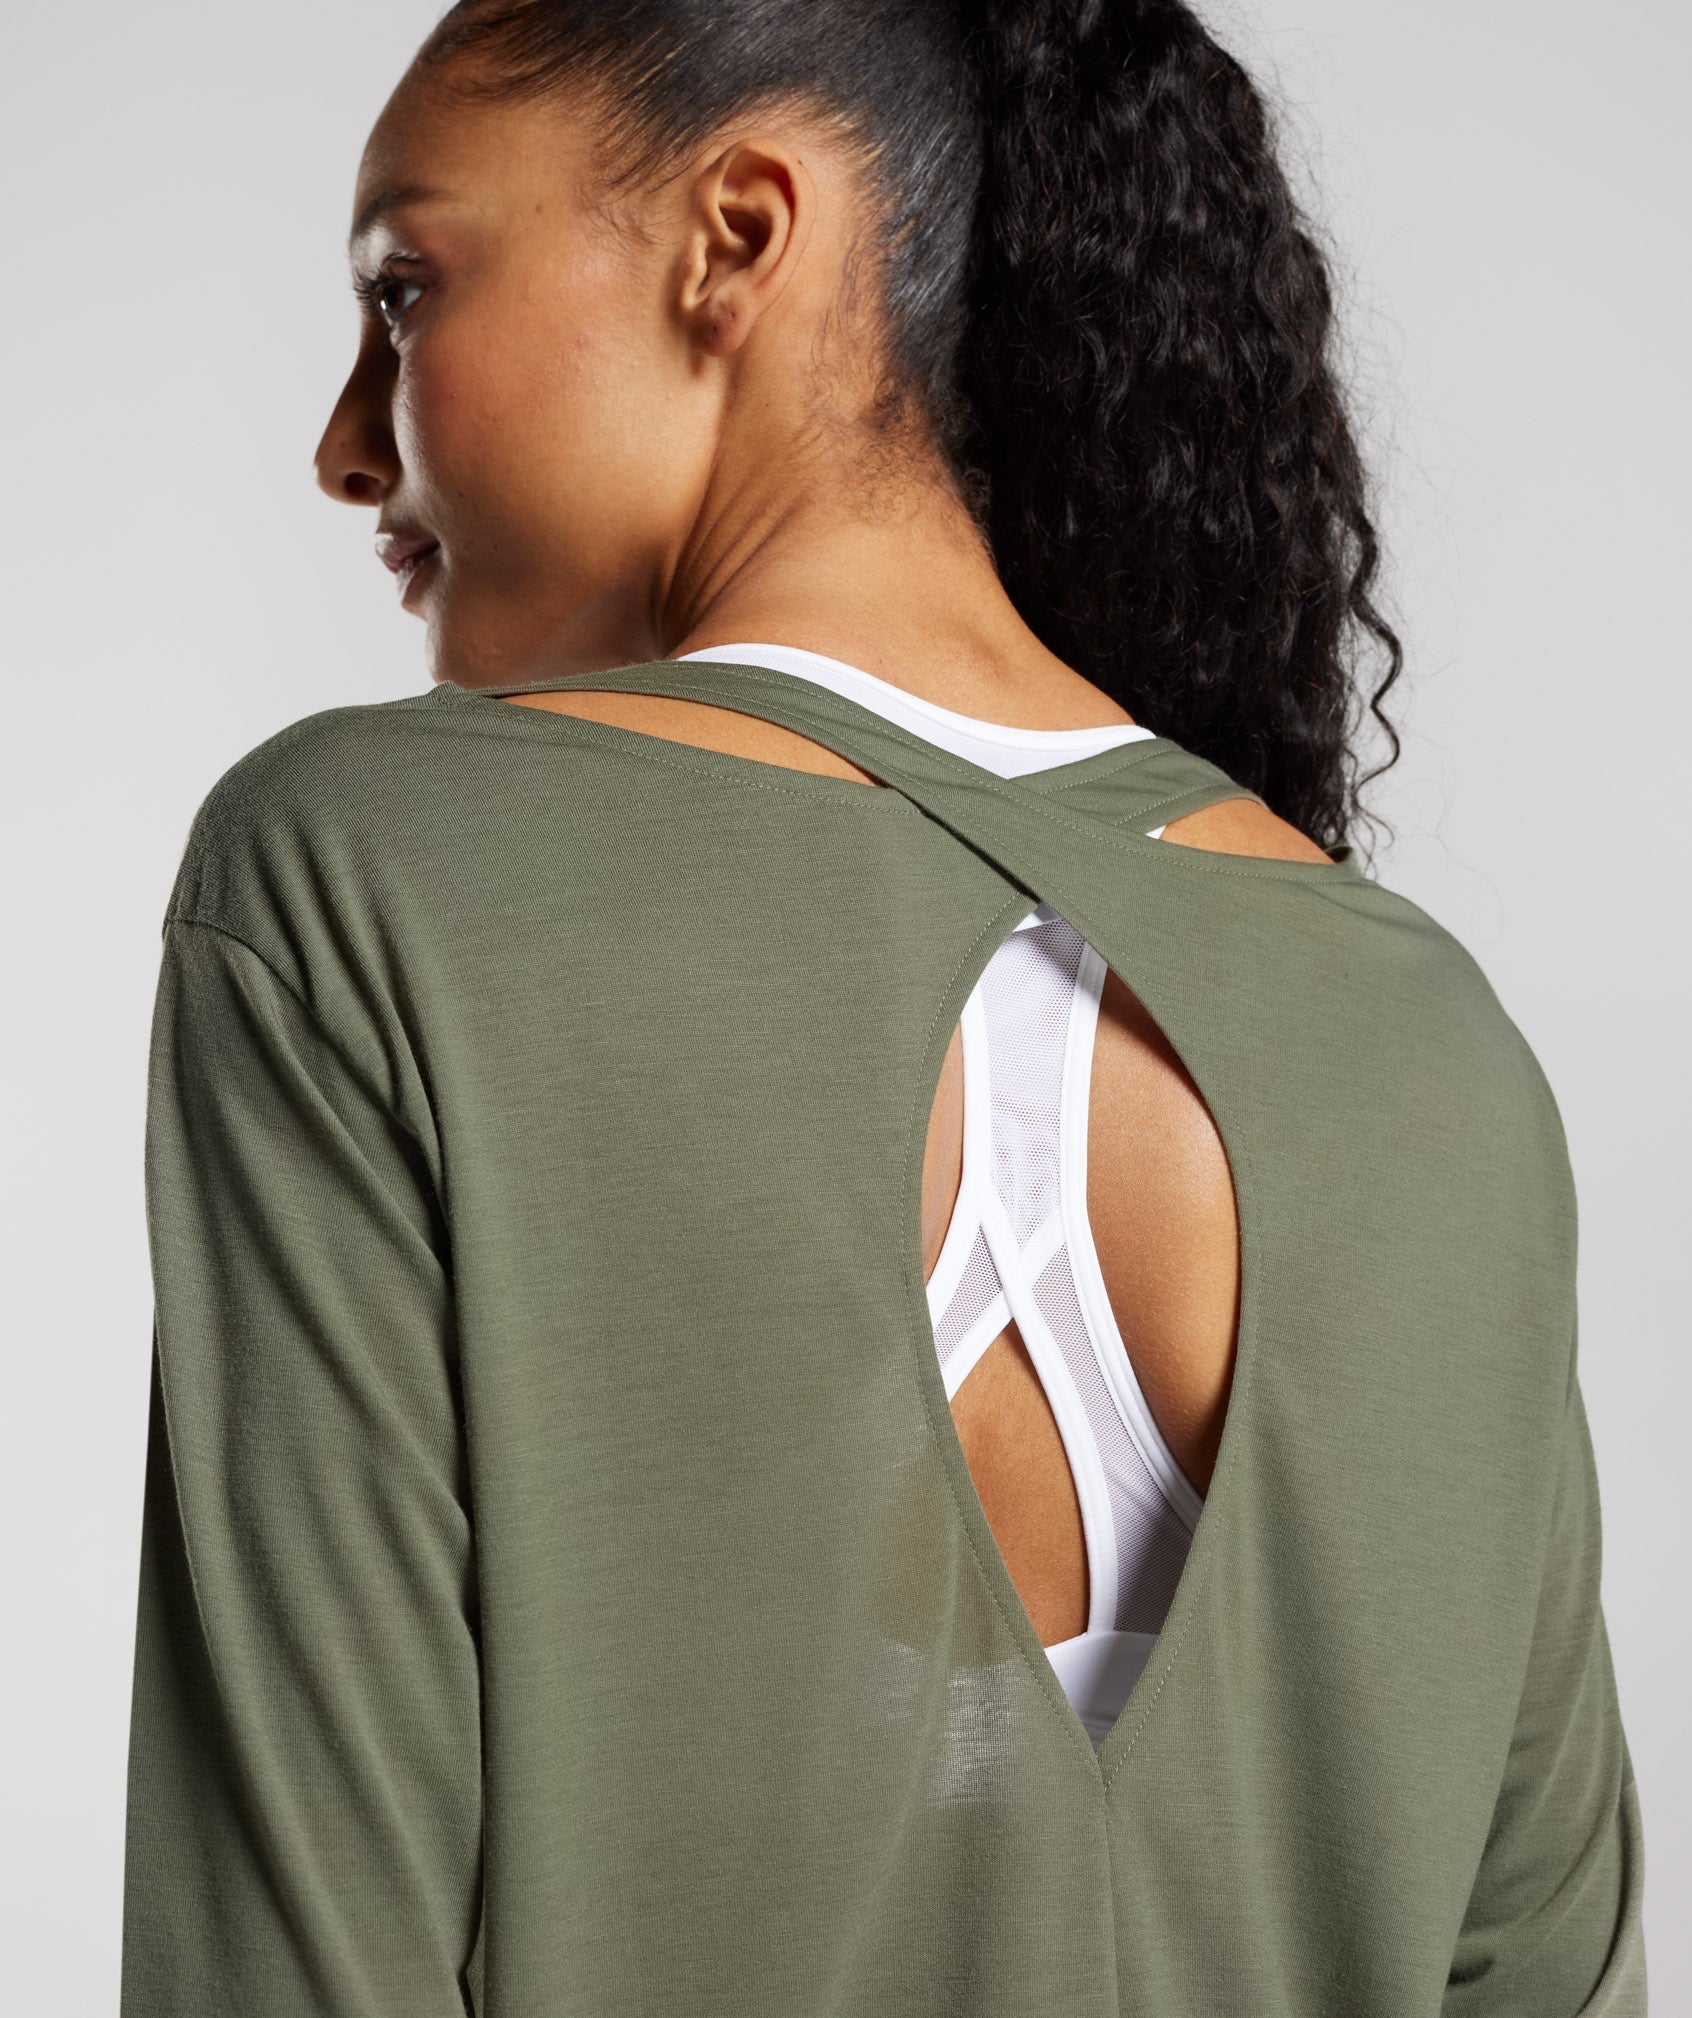 Super Soft Cut-Out Long Sleeve Top in  Dusty Olive